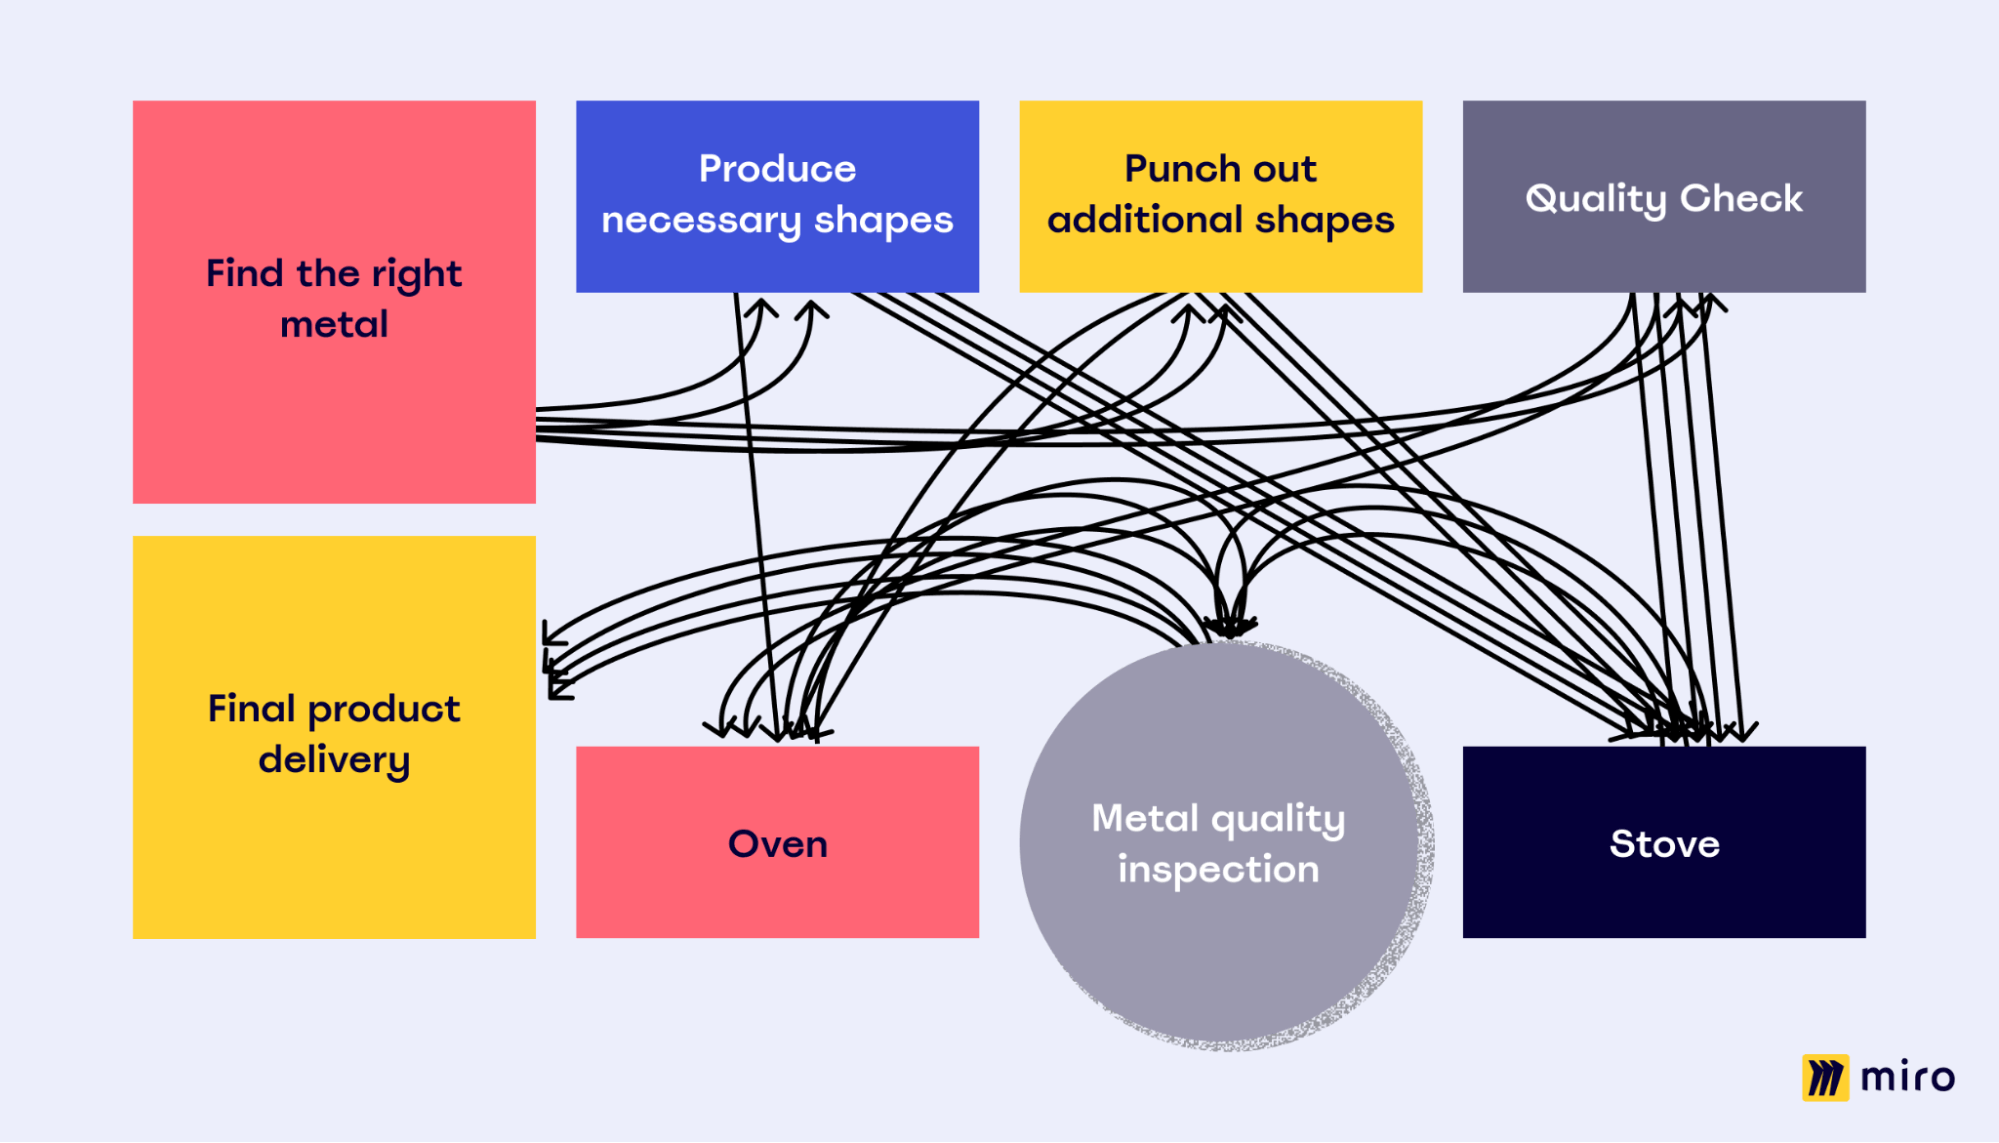 The layout of a stamping factory using a Spaghetti Diagram